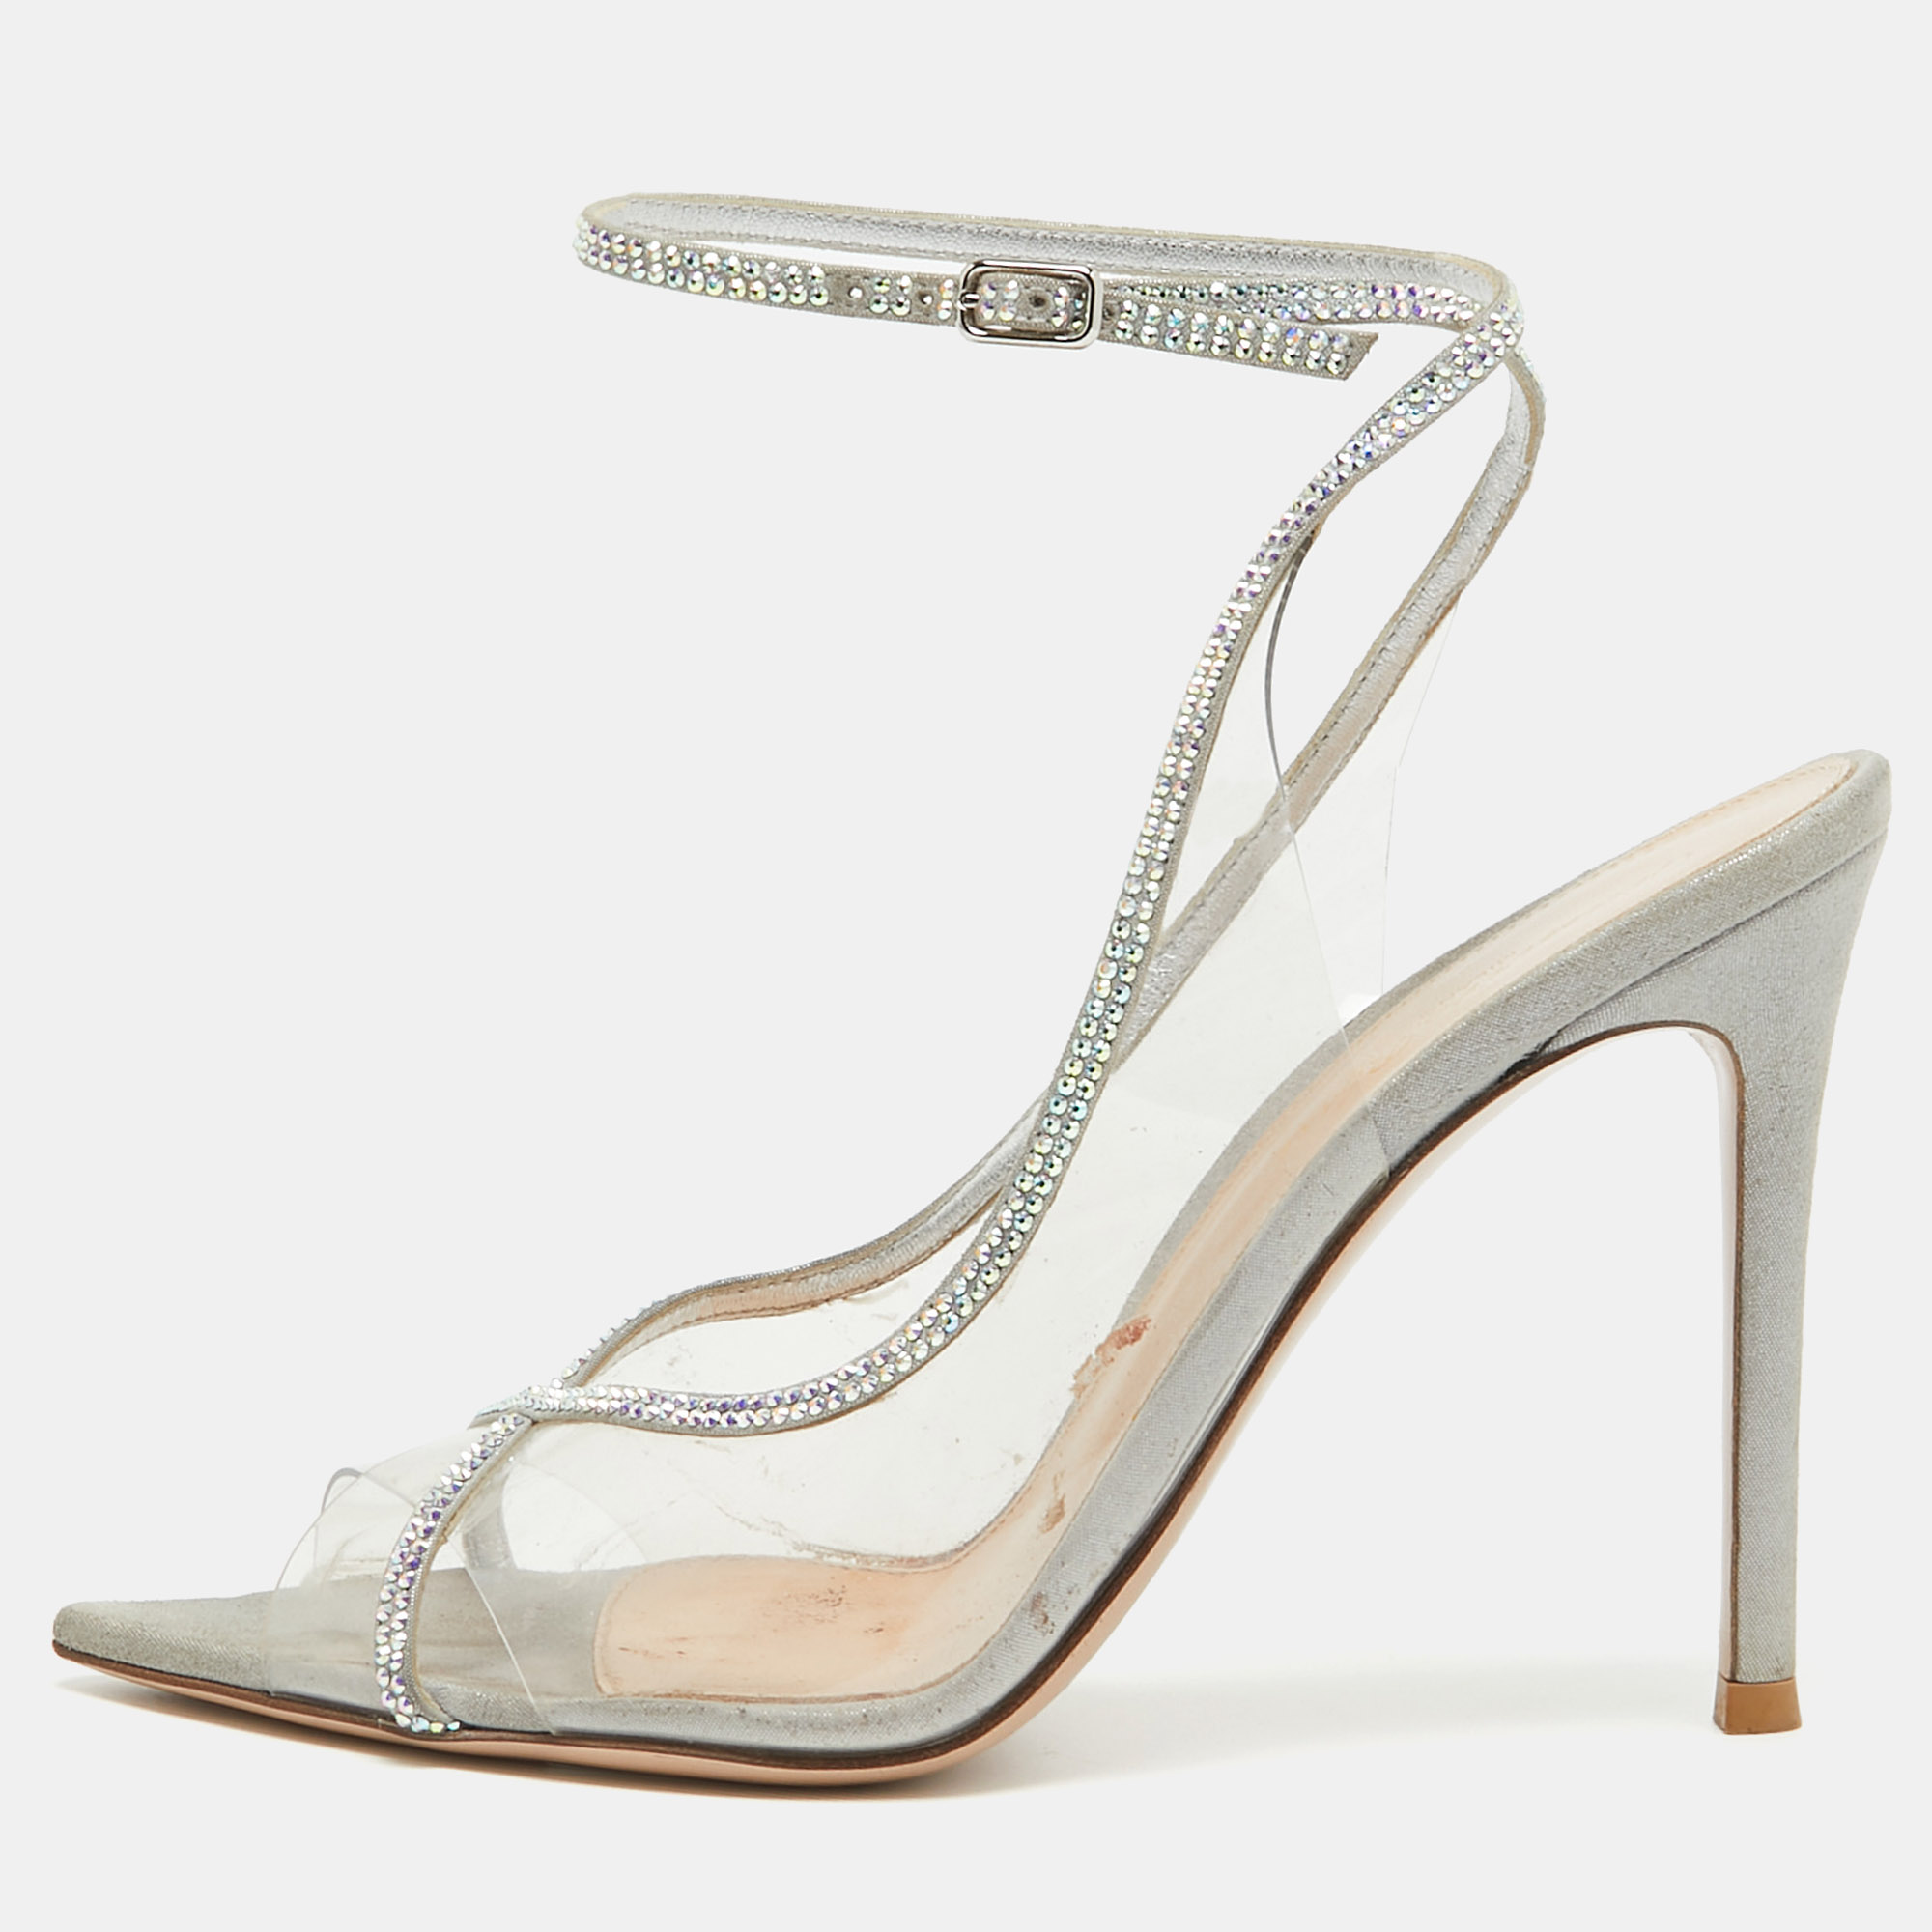 Gianvito rossi transparent pvc and leather crystal embellished ankle strap pumps size 36.5